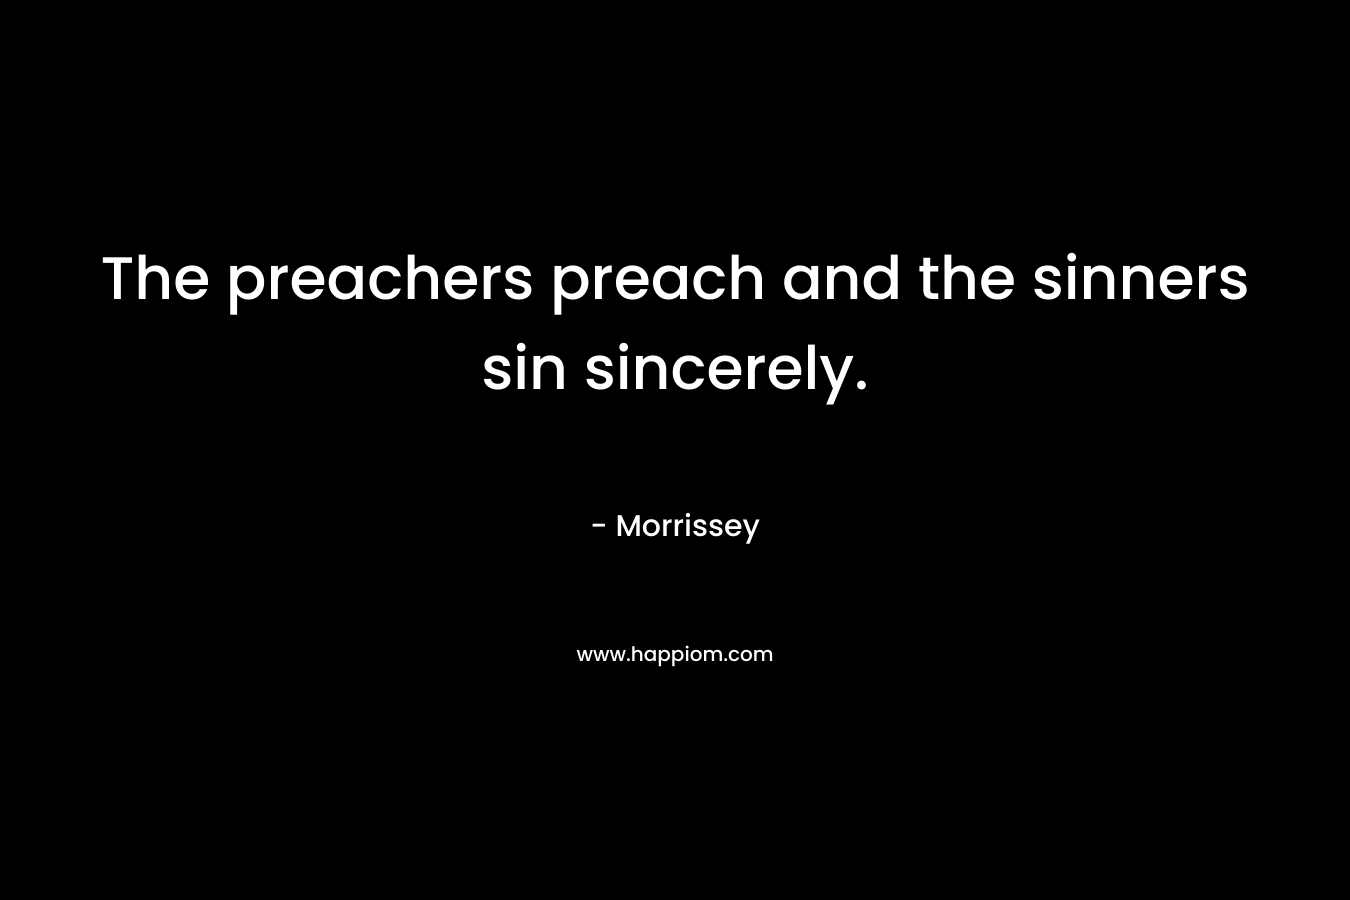 The preachers preach and the sinners sin sincerely.